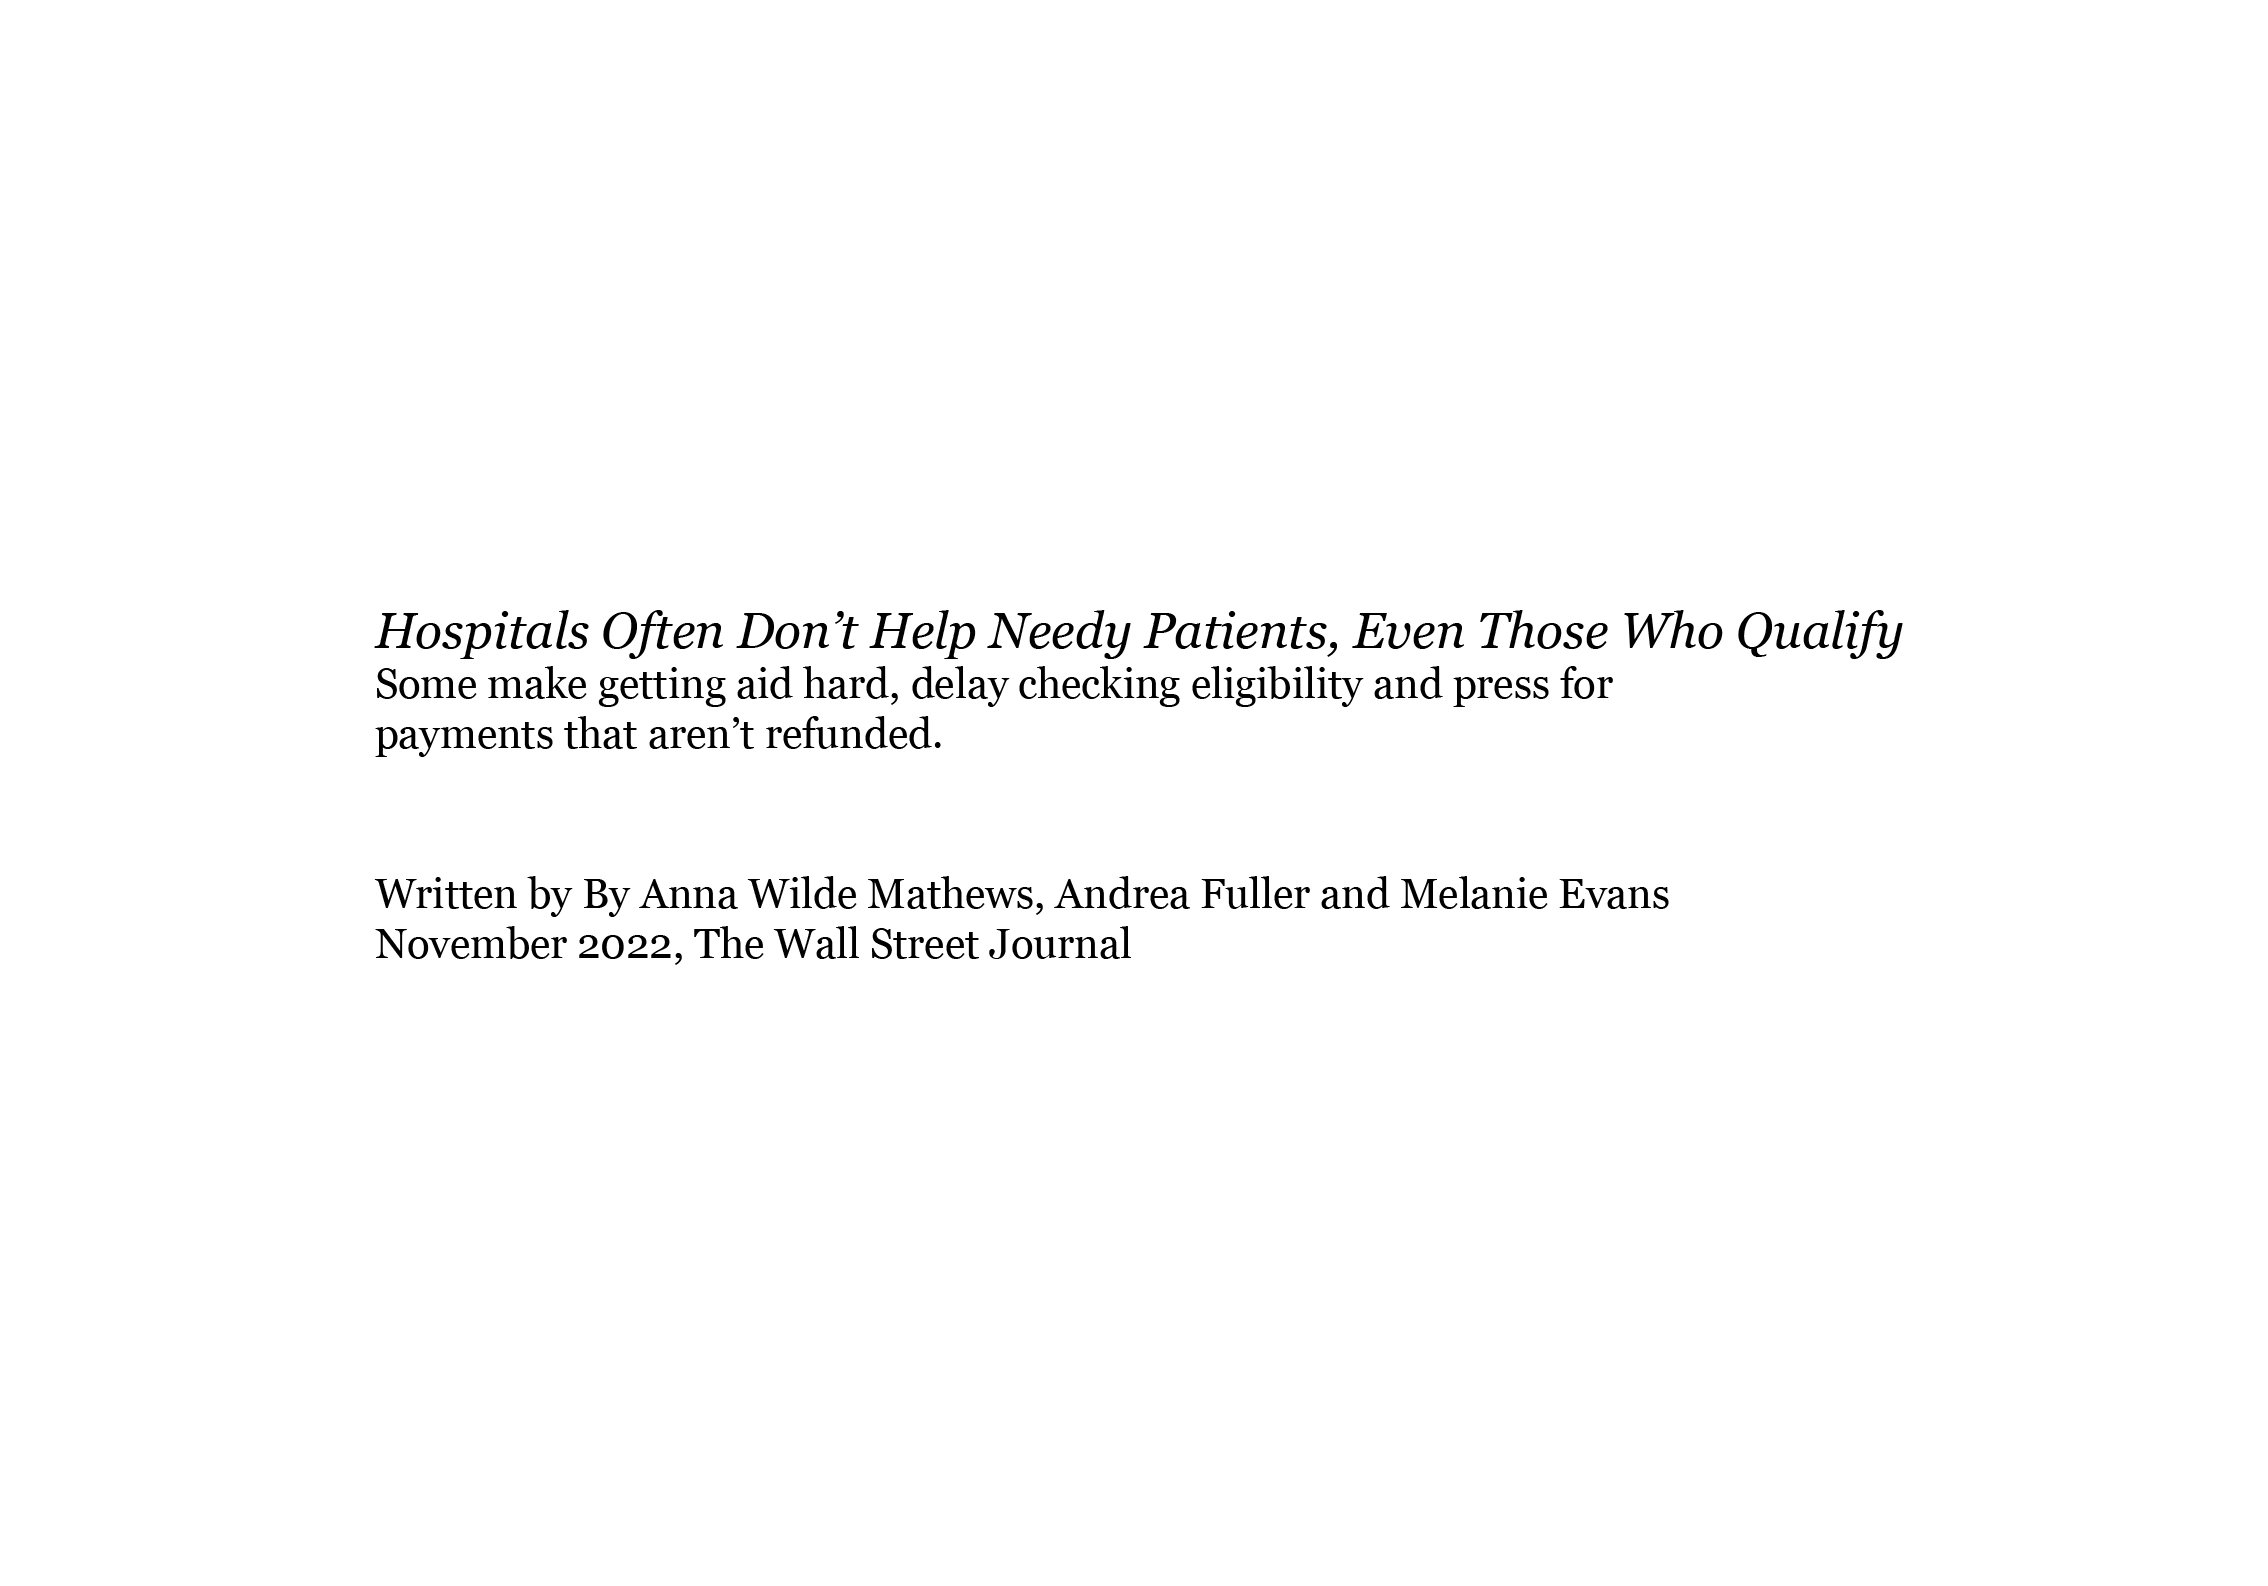  Hospitals Not Helping Patients With High Bills  The Wall Street Journal, 2022  